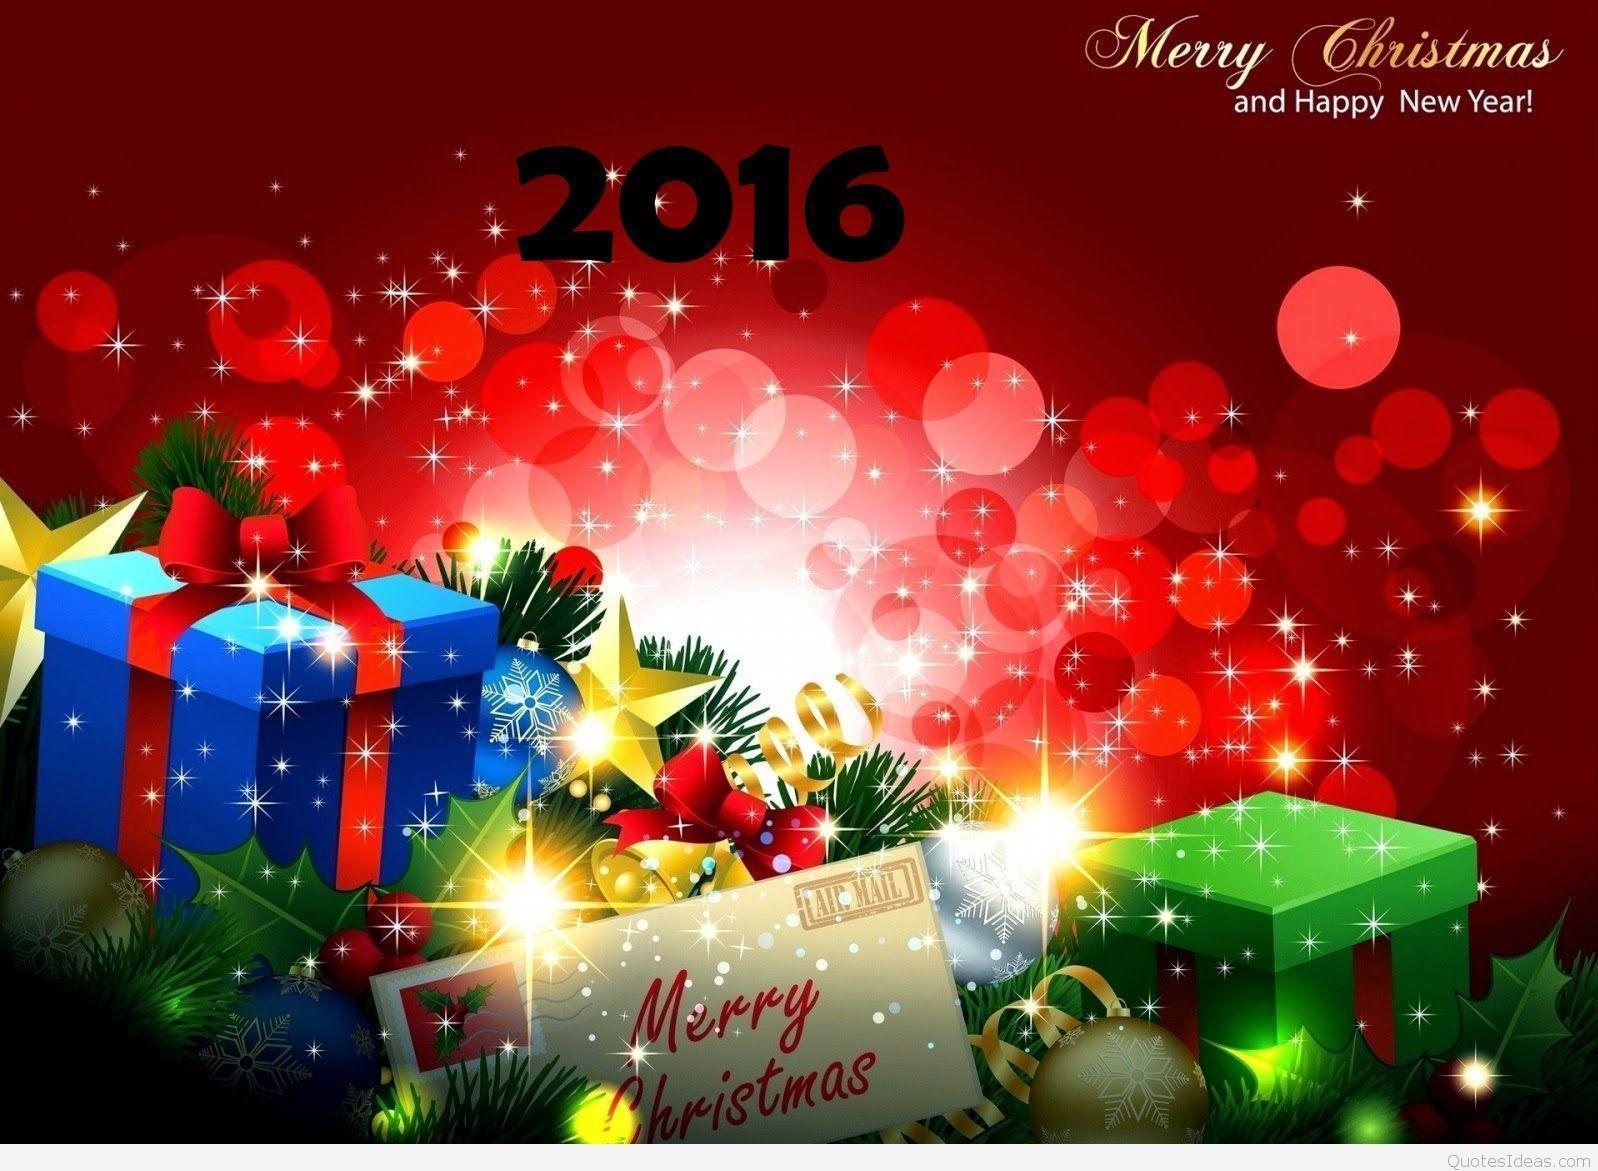 Wallpaper a Merry Christmas and a Hapyp new year wish 2016